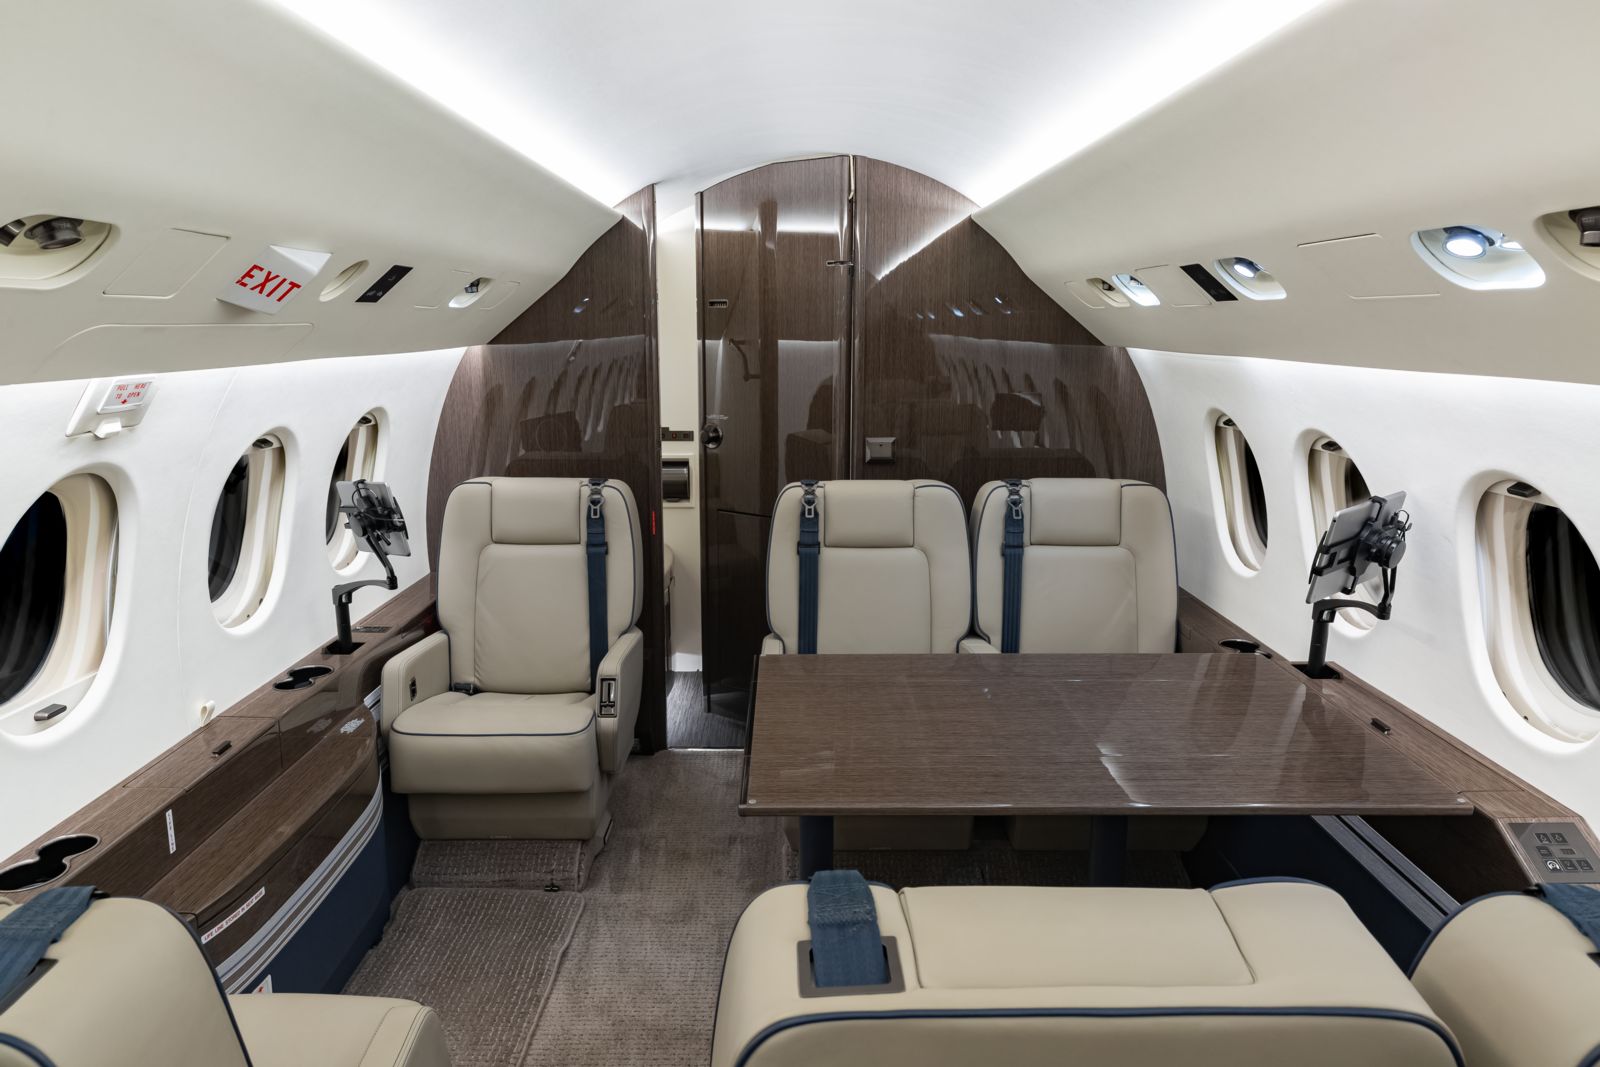 Dassault Falcon 2000  S/N 128 for sale | gallery image: /userfiles/files/bfp_2413.jpg